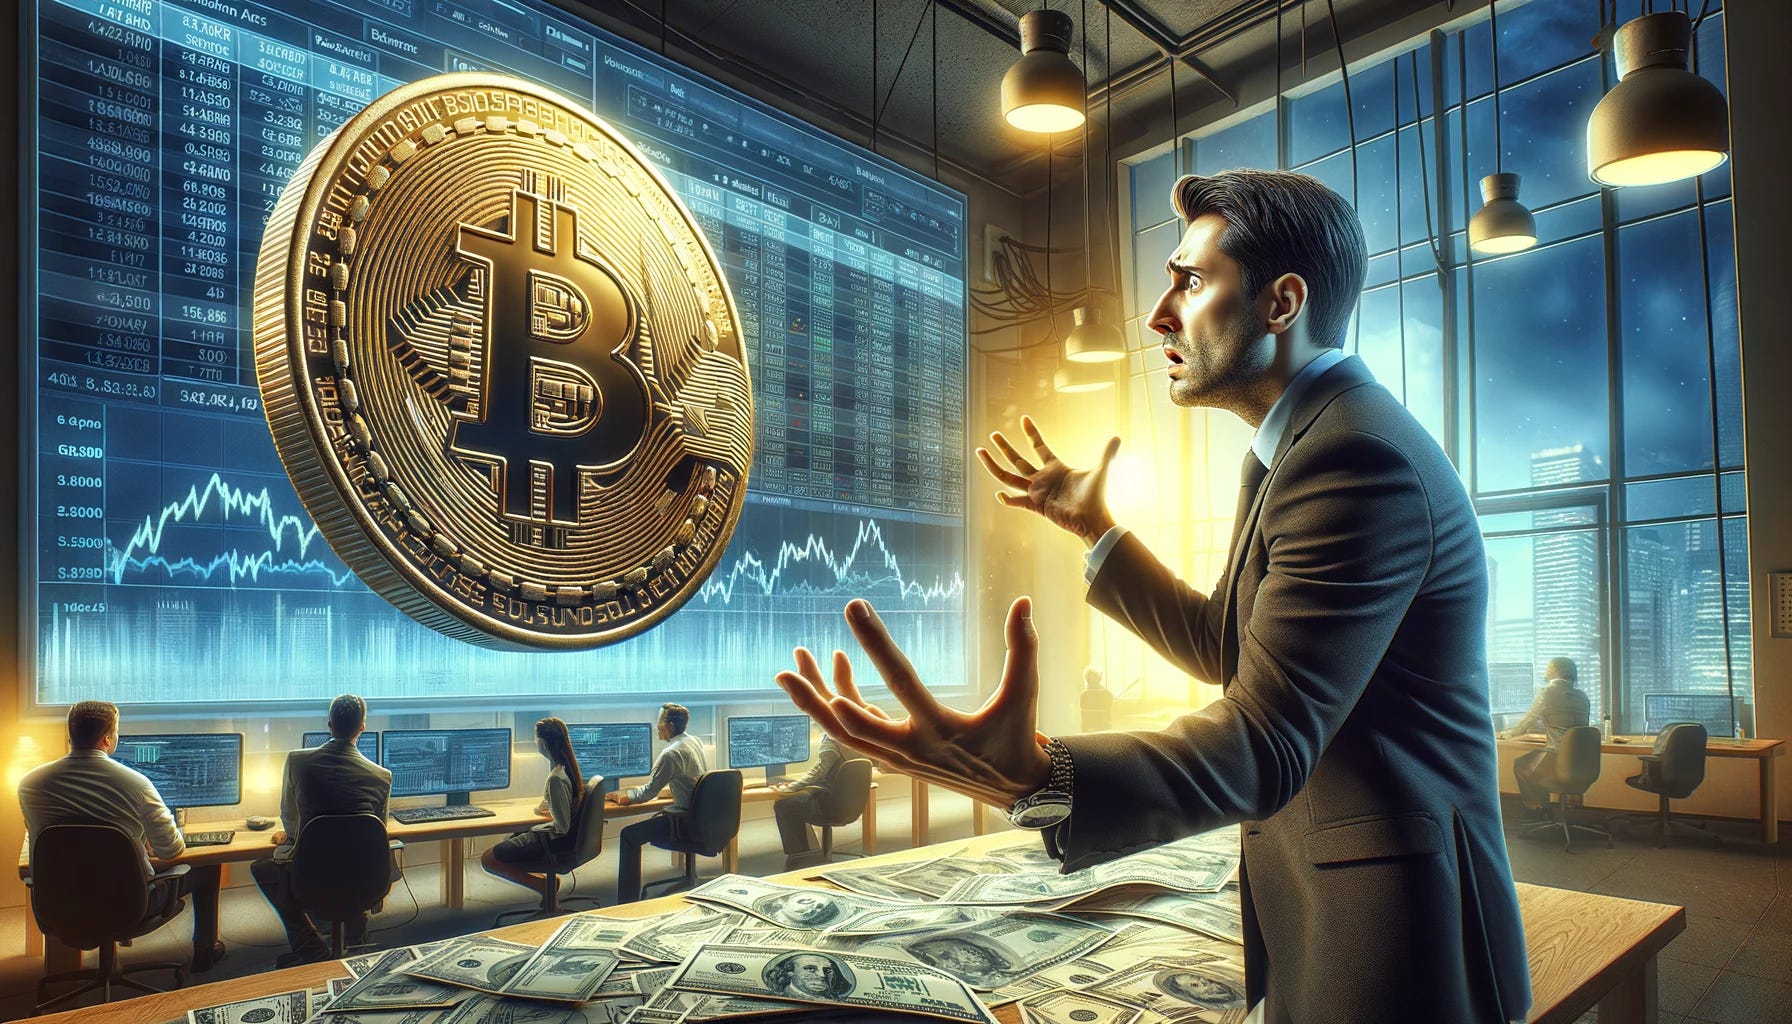 Create a landscape-oriented image depicting an investor looking very worried at a large Bitcoin token. The investor's expression and body language should clearly convey a sense of concern and anxiety. The large Bitcoin token stands prominently in the scene, symbolizing the volatile nature of cryptocurrency investments. The setting could be a modern office or a financial trading floor, filled with screens displaying market data and graphs showing dramatic fluctuations. The atmosphere is tense, highlighting the uncertainties and high stakes involved in the world of digital currency trading. The overall composition should capture the dramatic moment of an investor grappling with the unpredictable movements of the Bitcoin market.